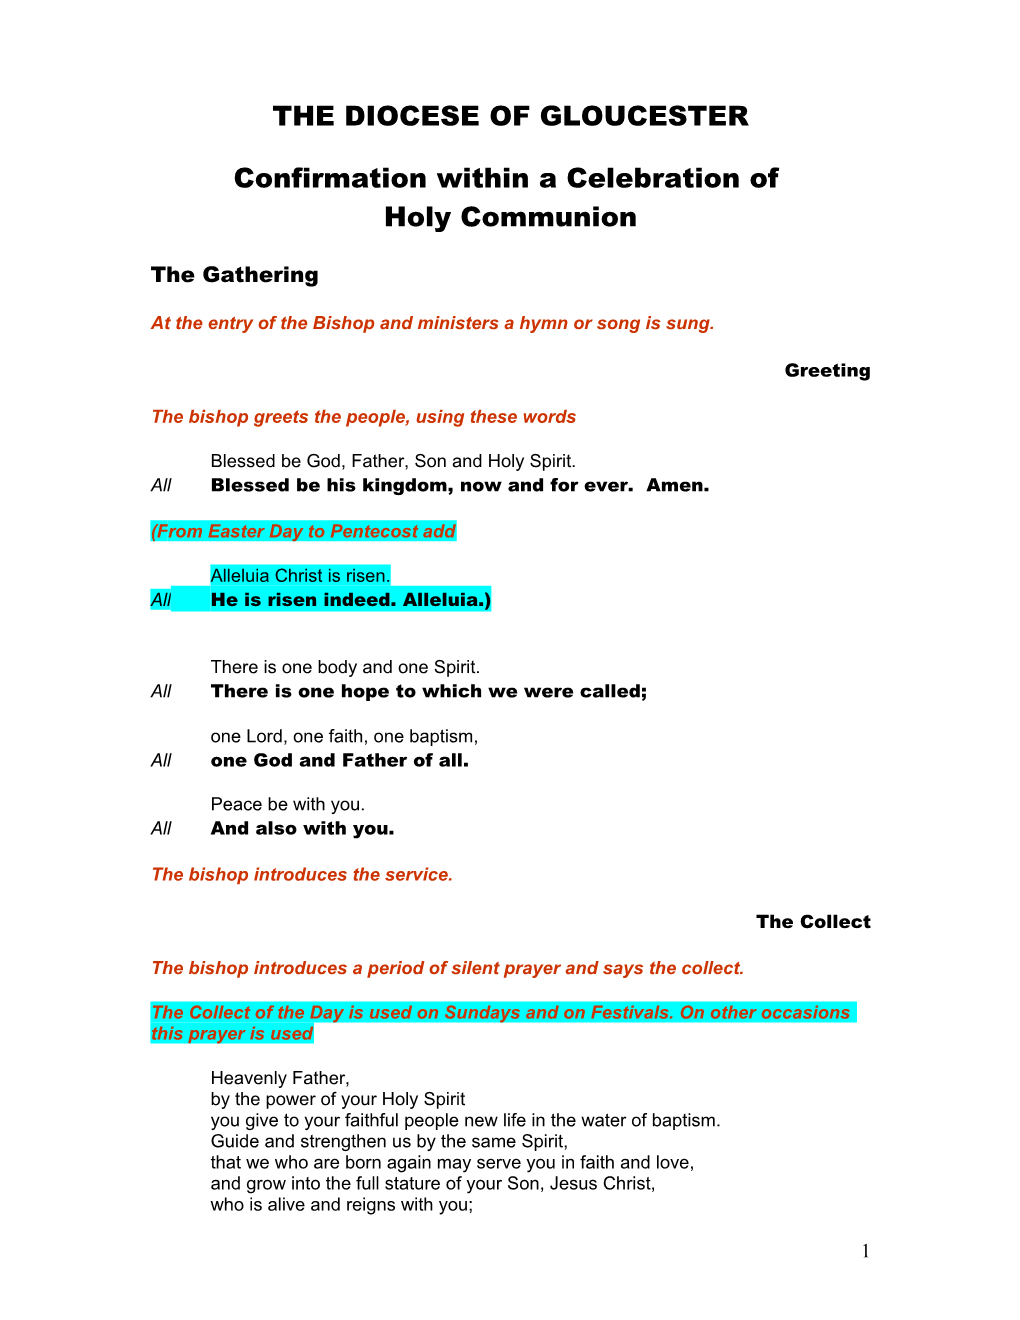 Baptism and Confirmation at the Order for Celebration of Holy Communion